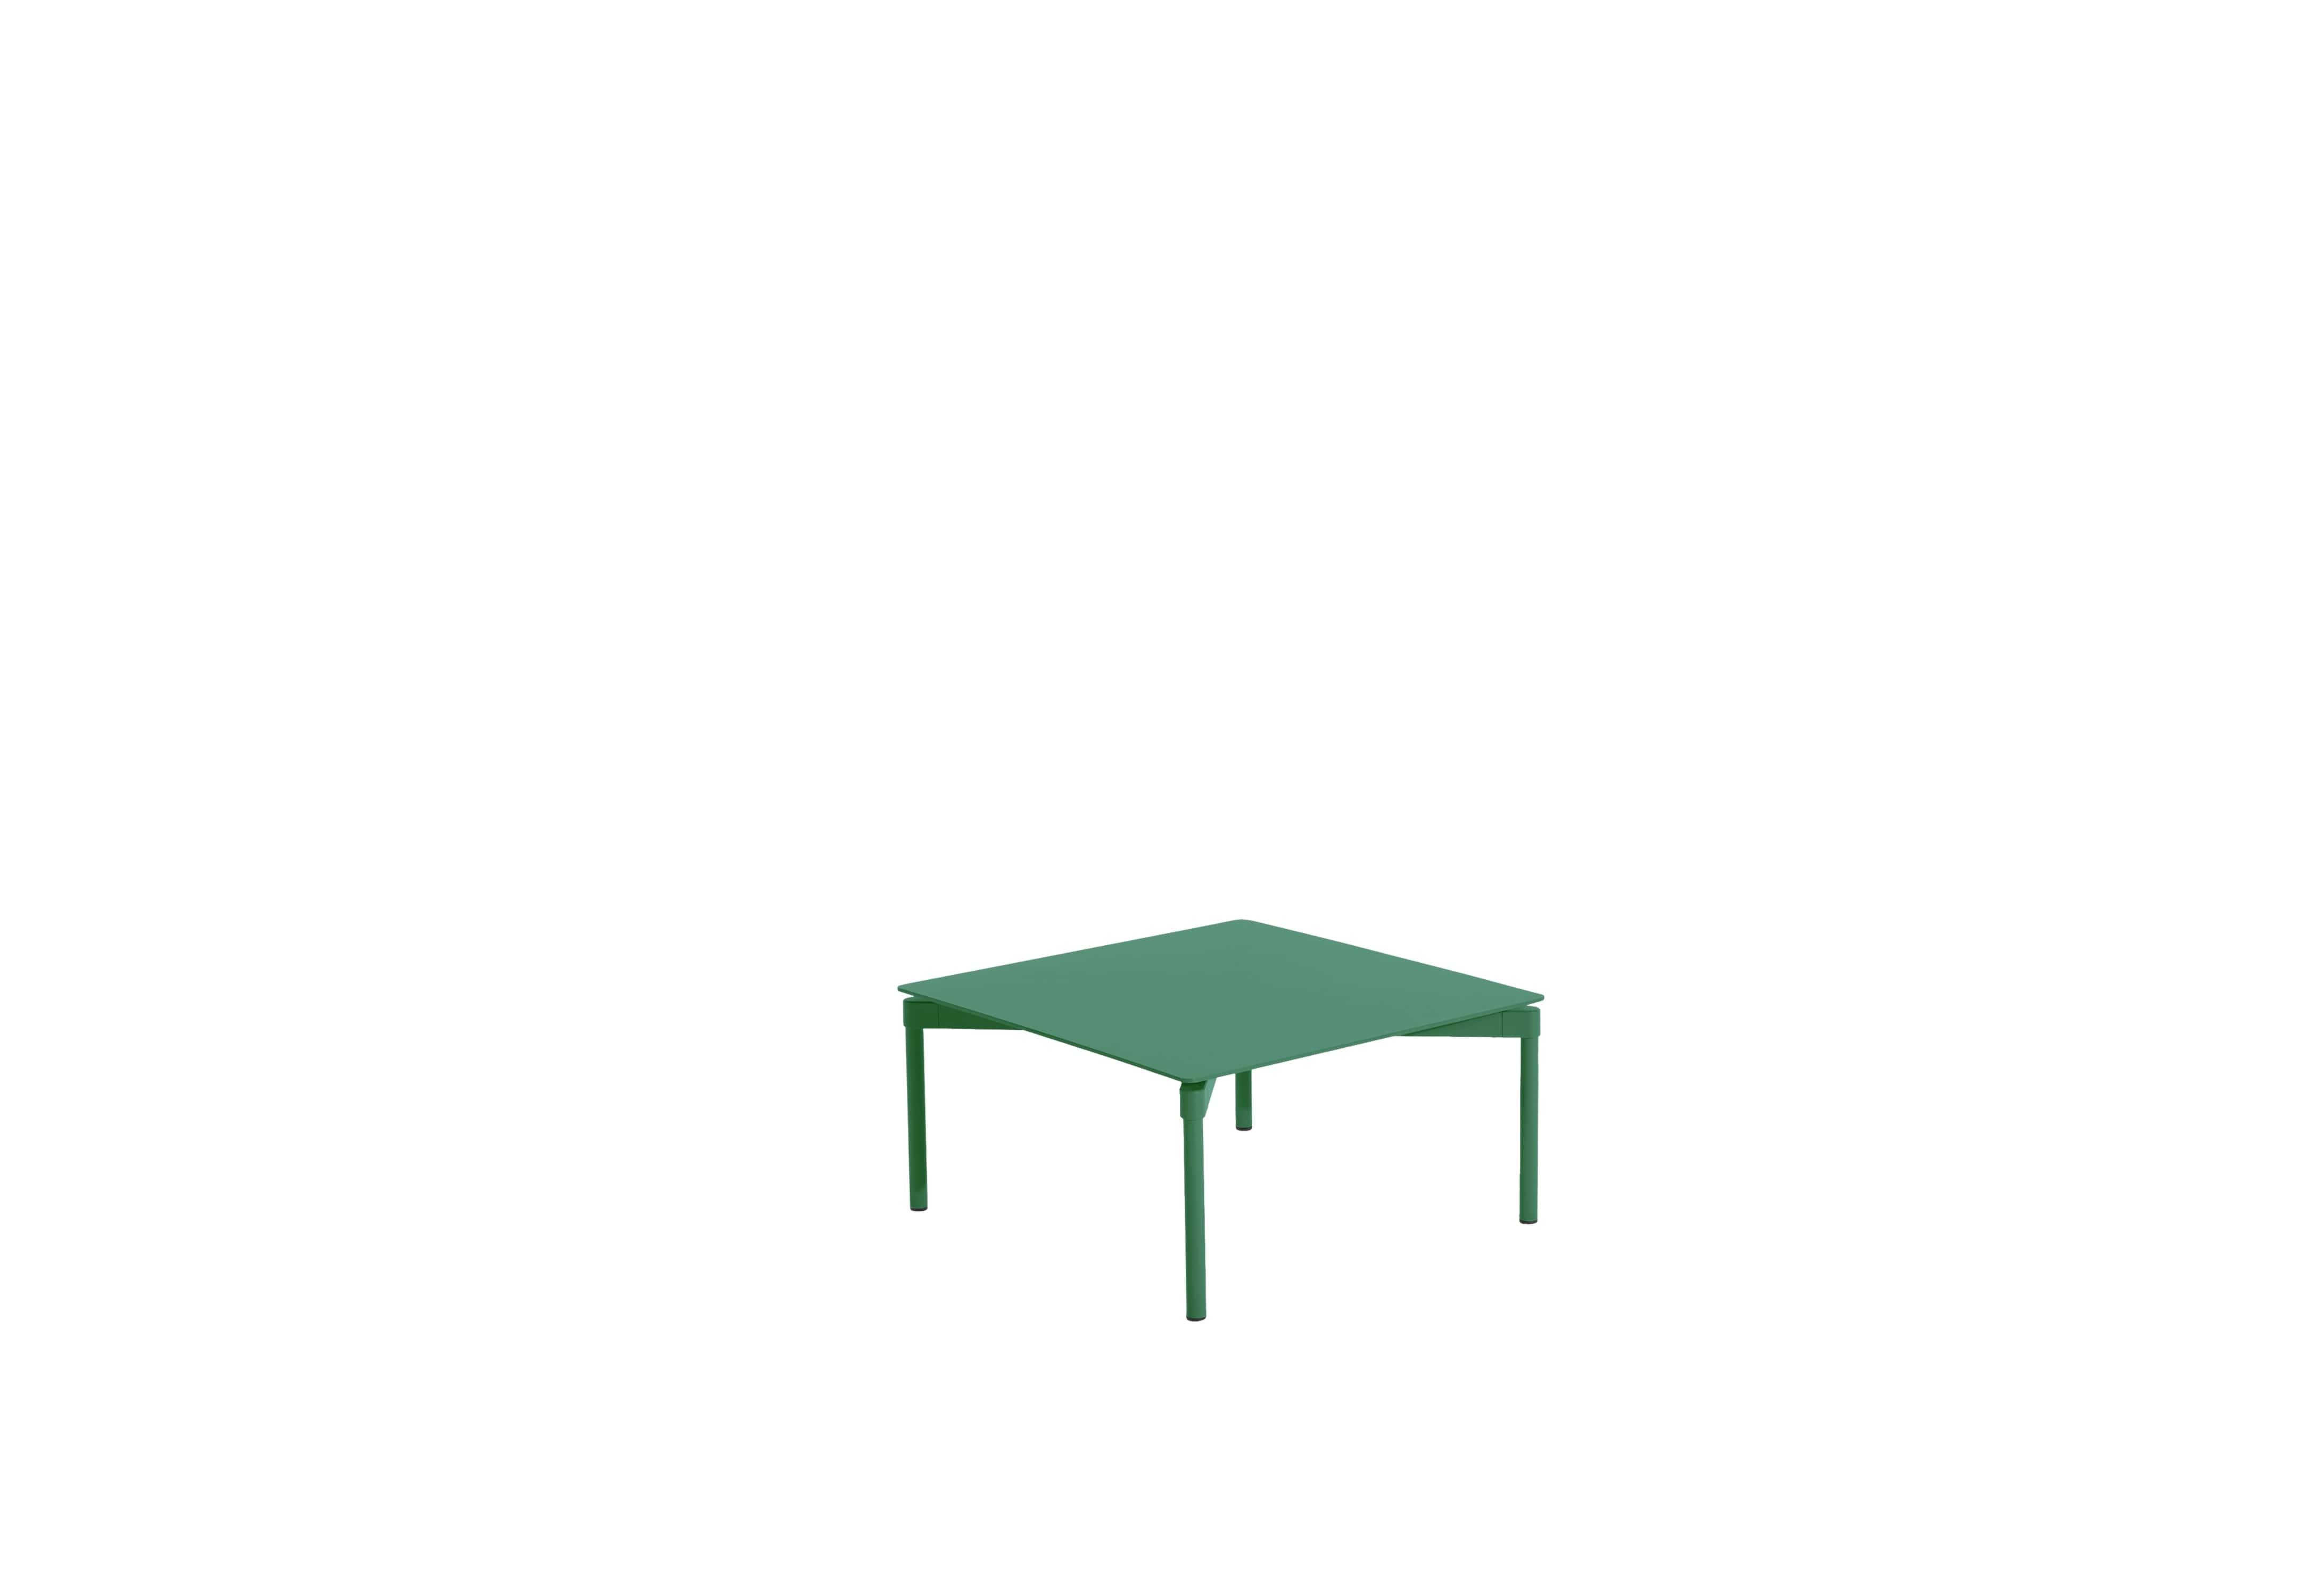 Petite Friture Fromme Coffee Table in Mint-green Aluminium by Tom Chung, 2020

The Fromme collection stands out by its pure line and compact design. Absorbers placed under the seating gives a soft and very comfortable flexibility to seats. Made